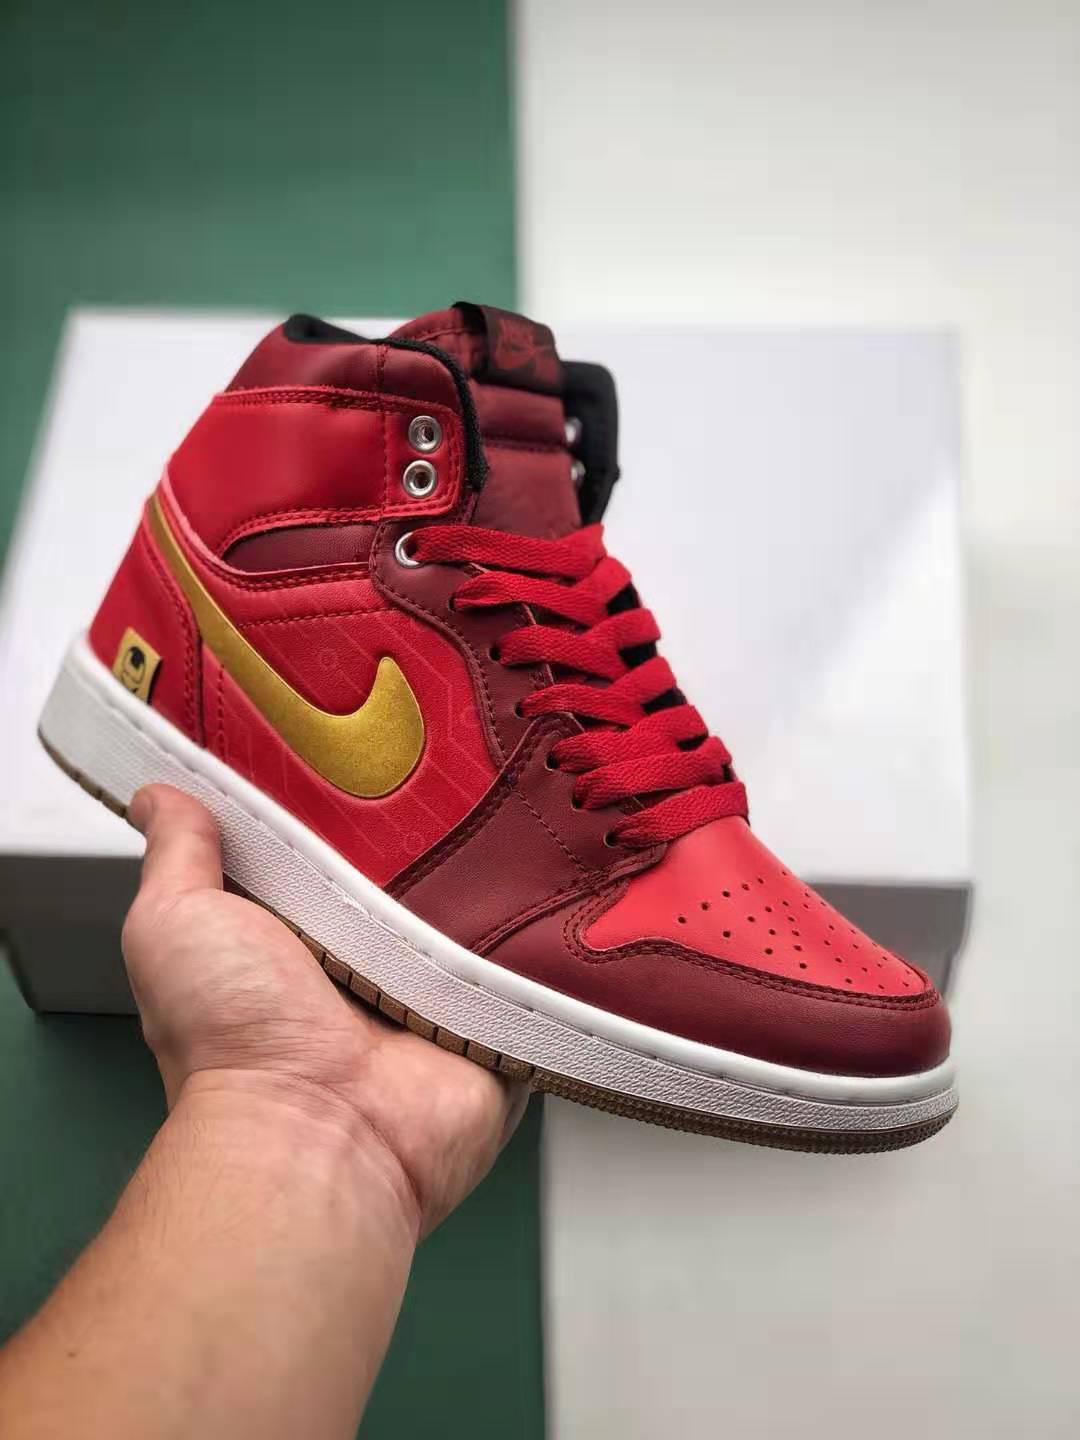 Air Jordan 1 High Iron Man Red White Gold 555088-188 | Limited Edition Athletic Sneakers